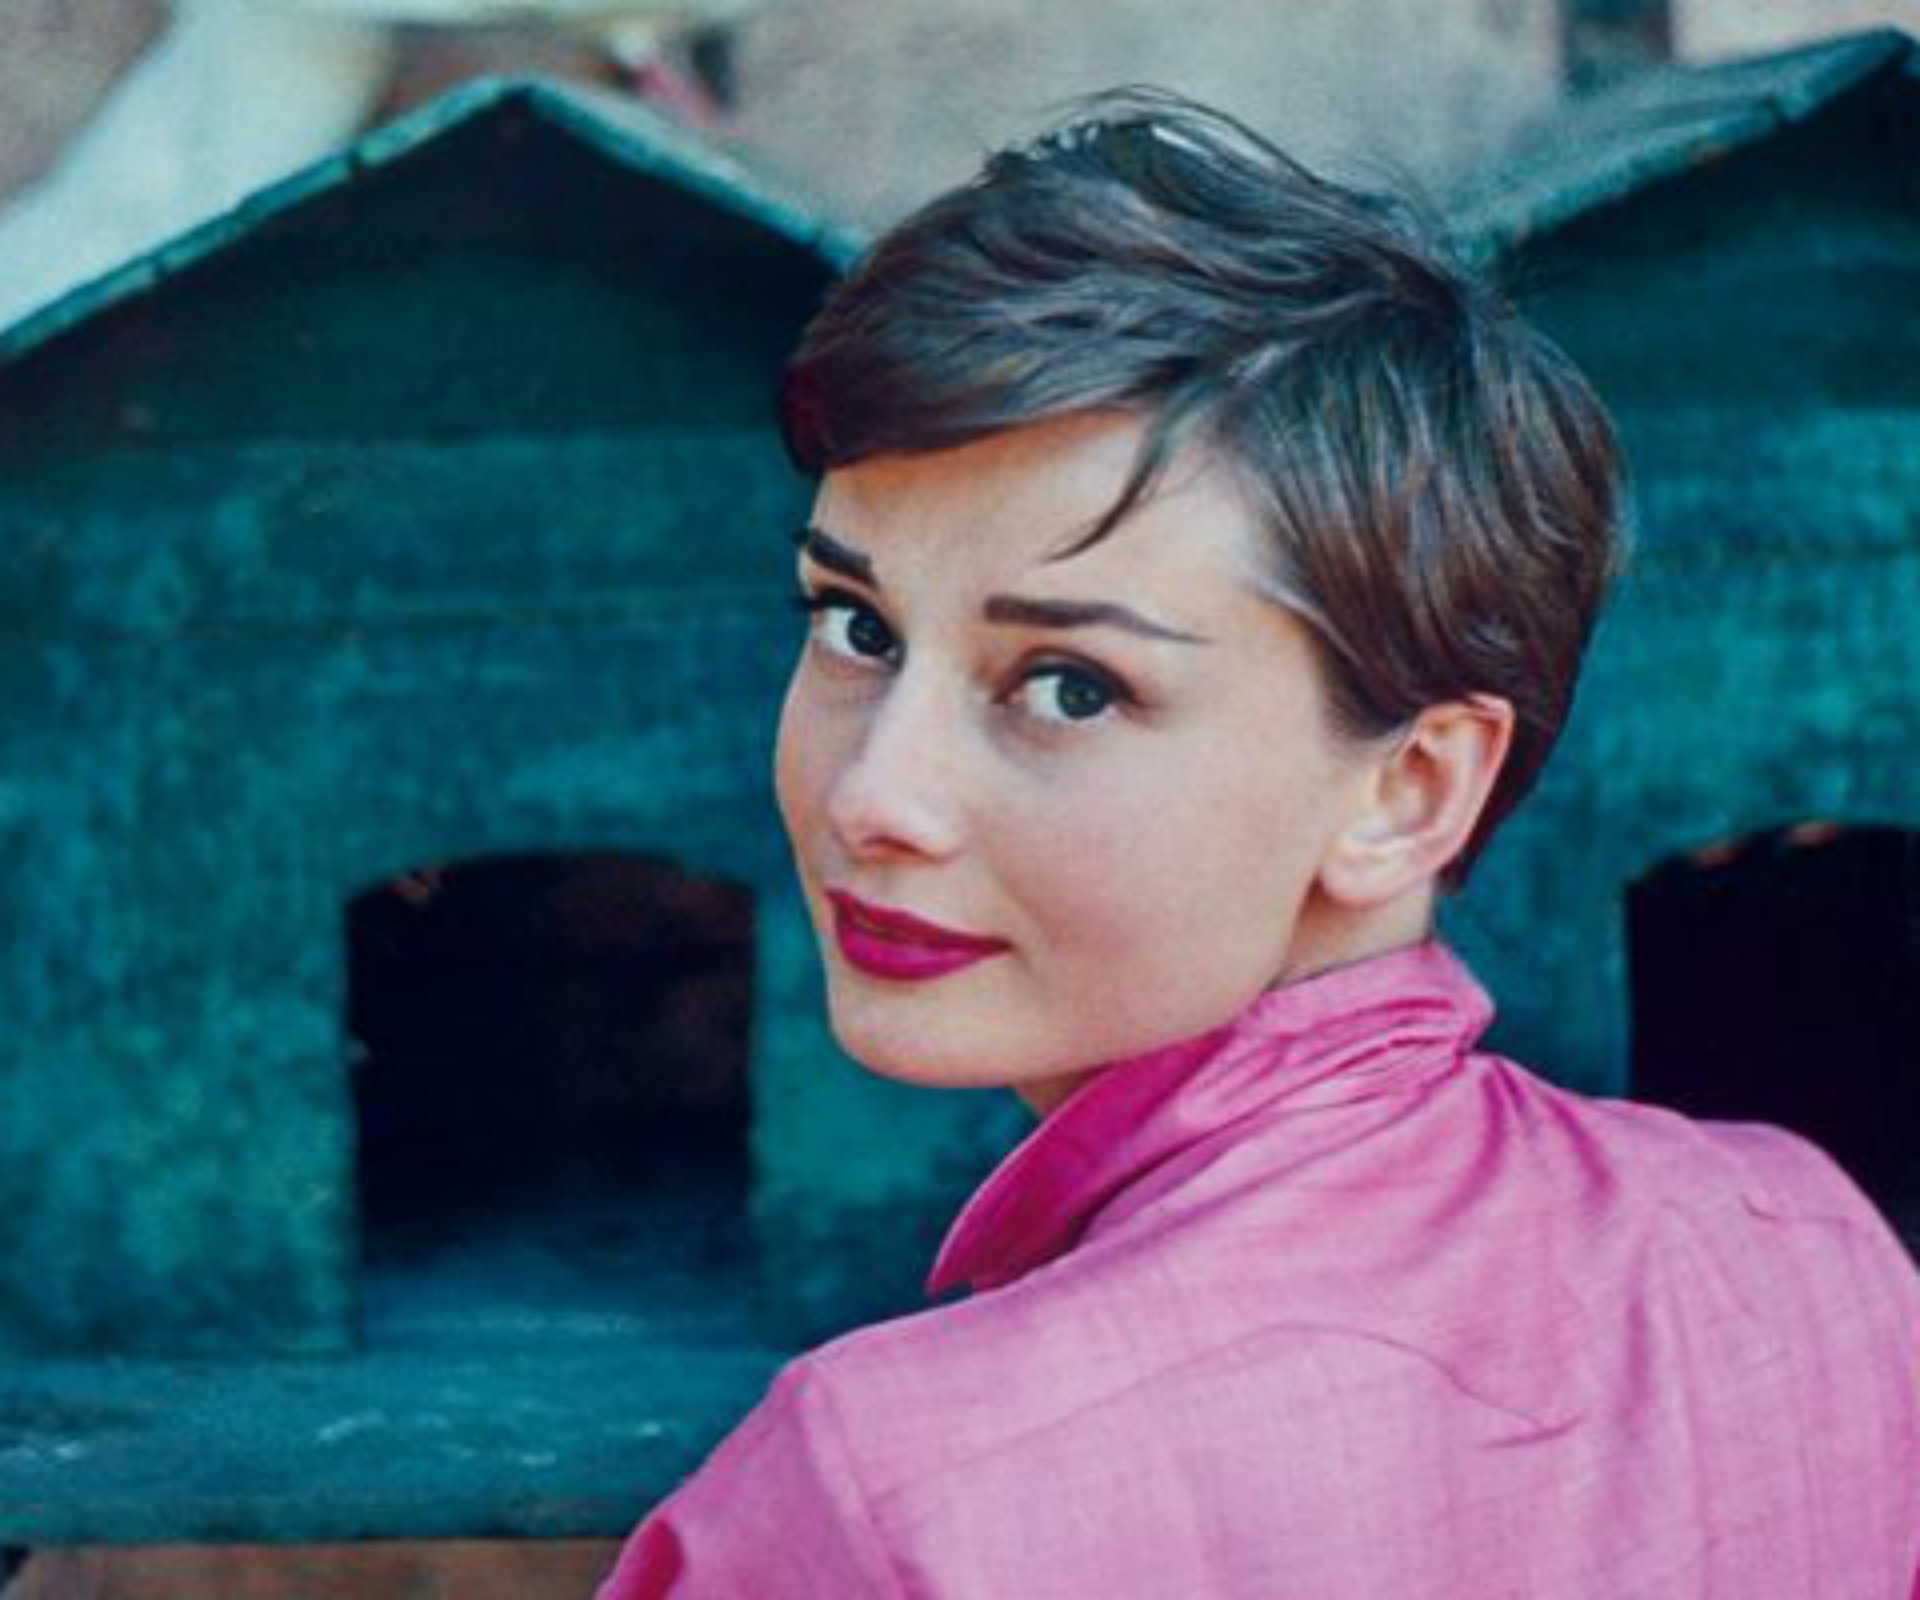 Rare pictures of Audrey Hepburn unearthed